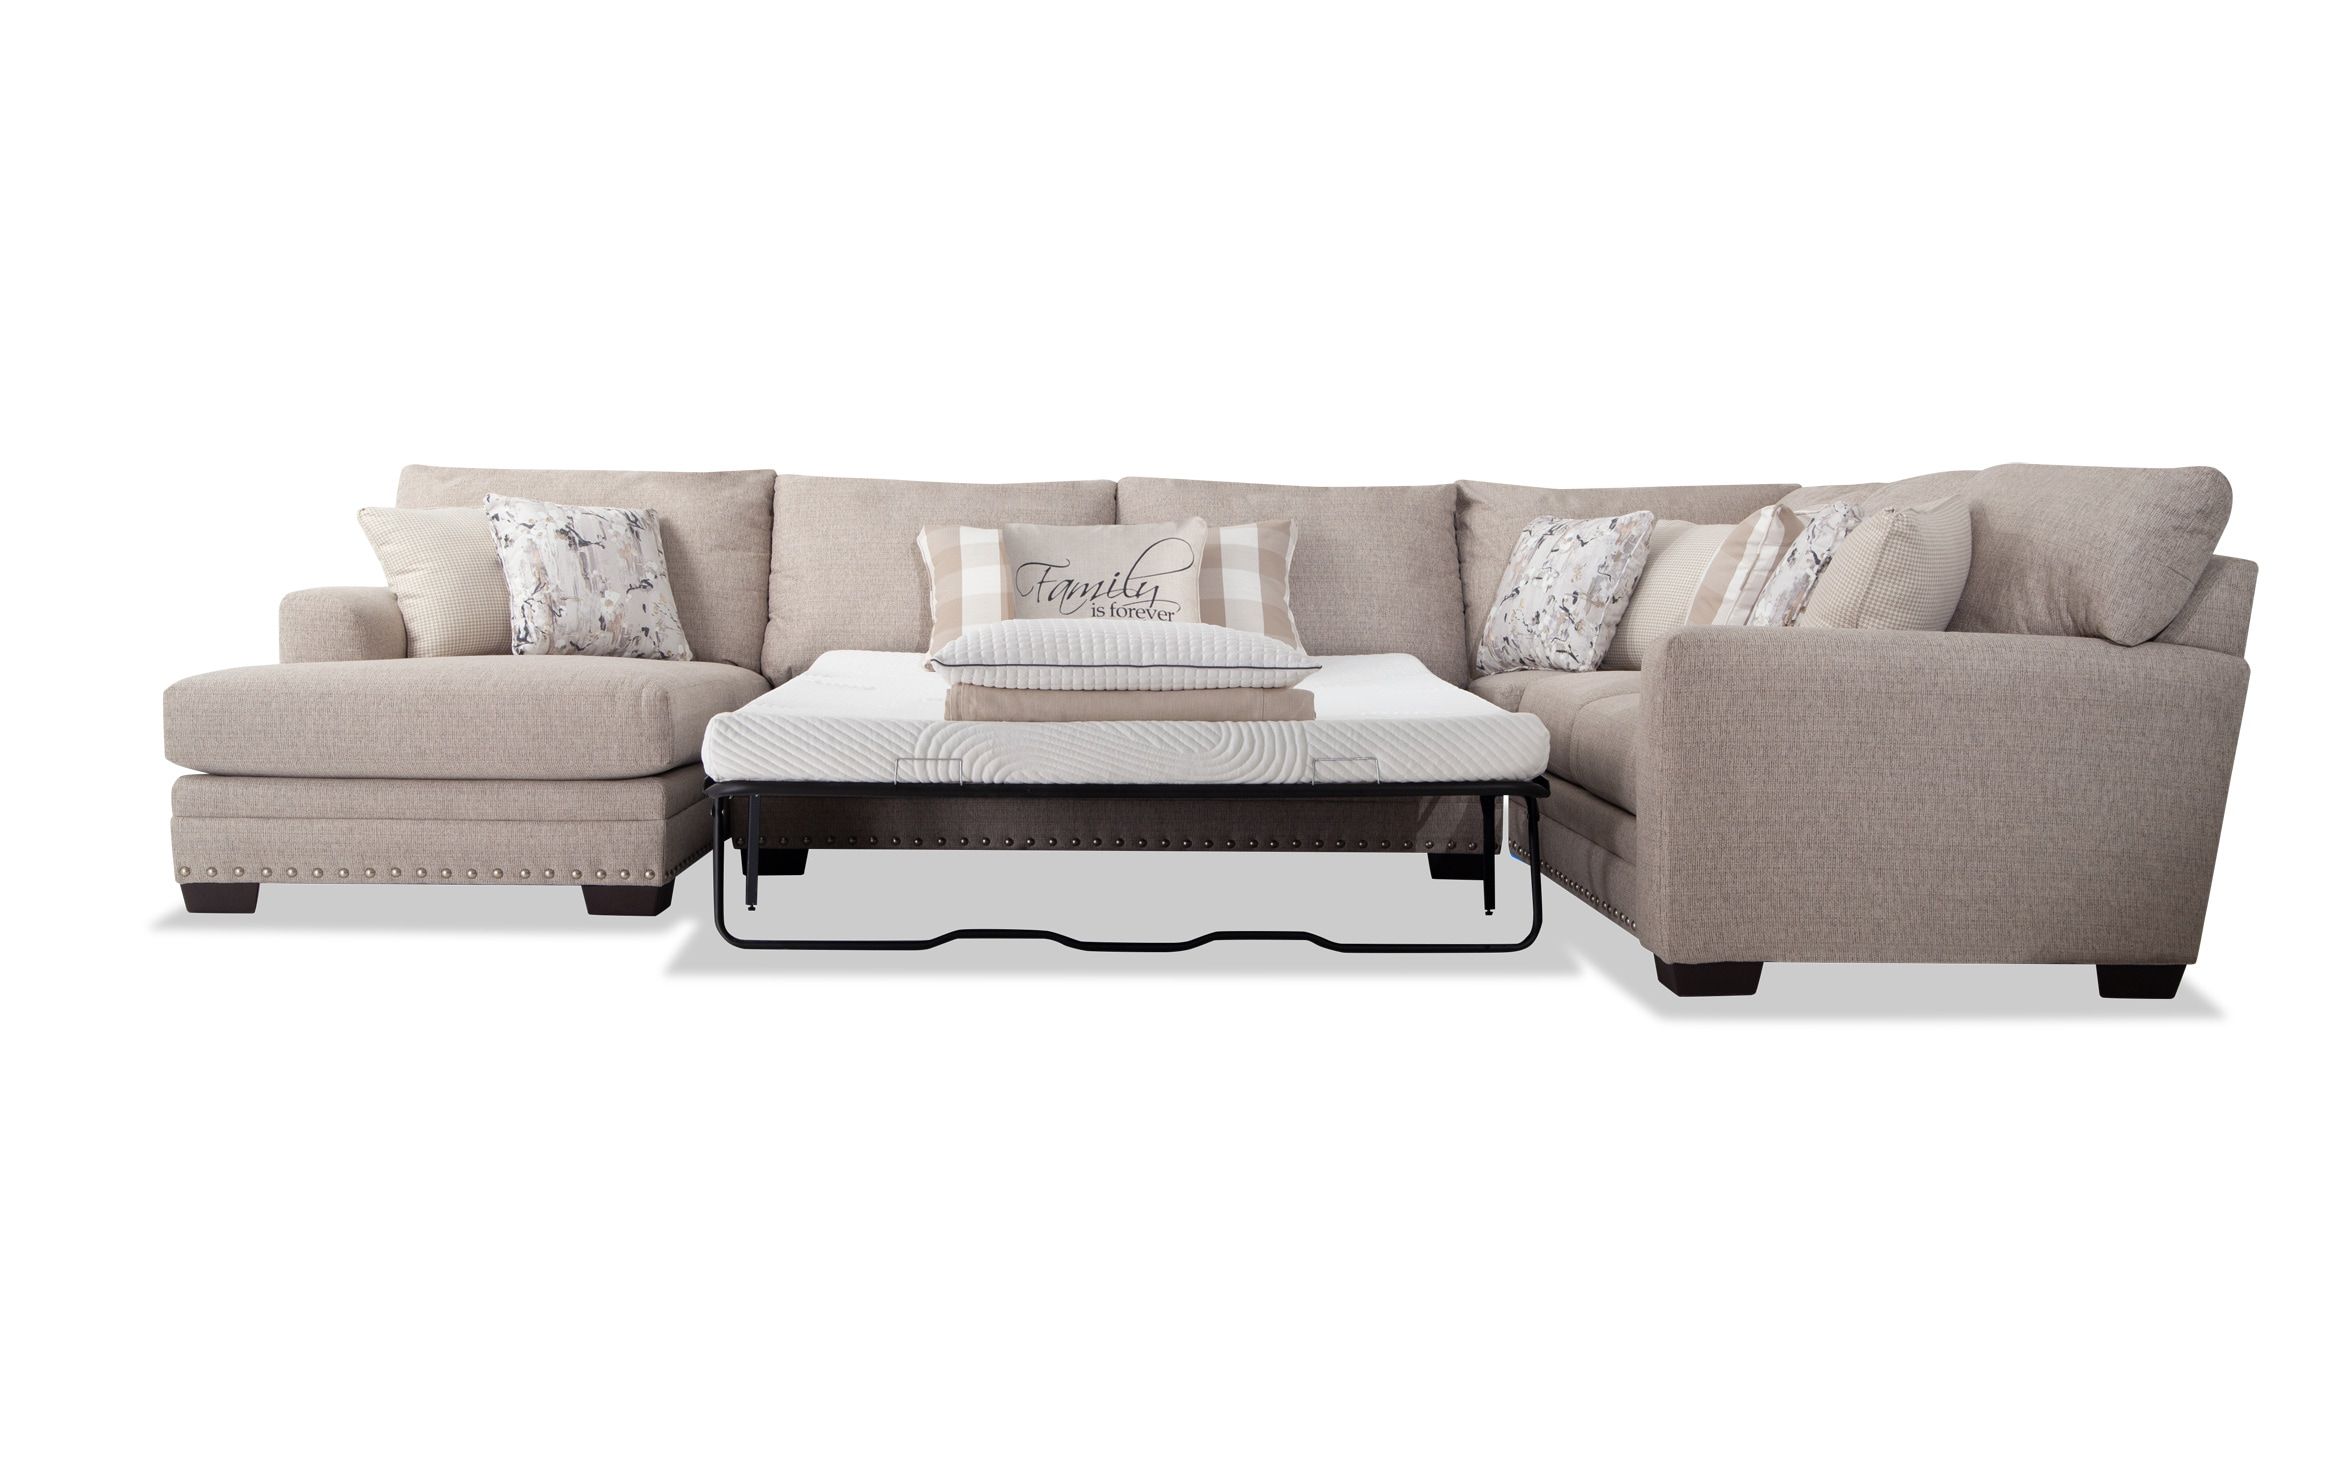 Cottage Chic Beige 4 Piece Right Arm Facing Bob O Pedic Queen Sleeper  Sectional | Bob's Discount Furniture With Left Or Right Facing Sleeper Sectional Sofas (View 20 of 20)